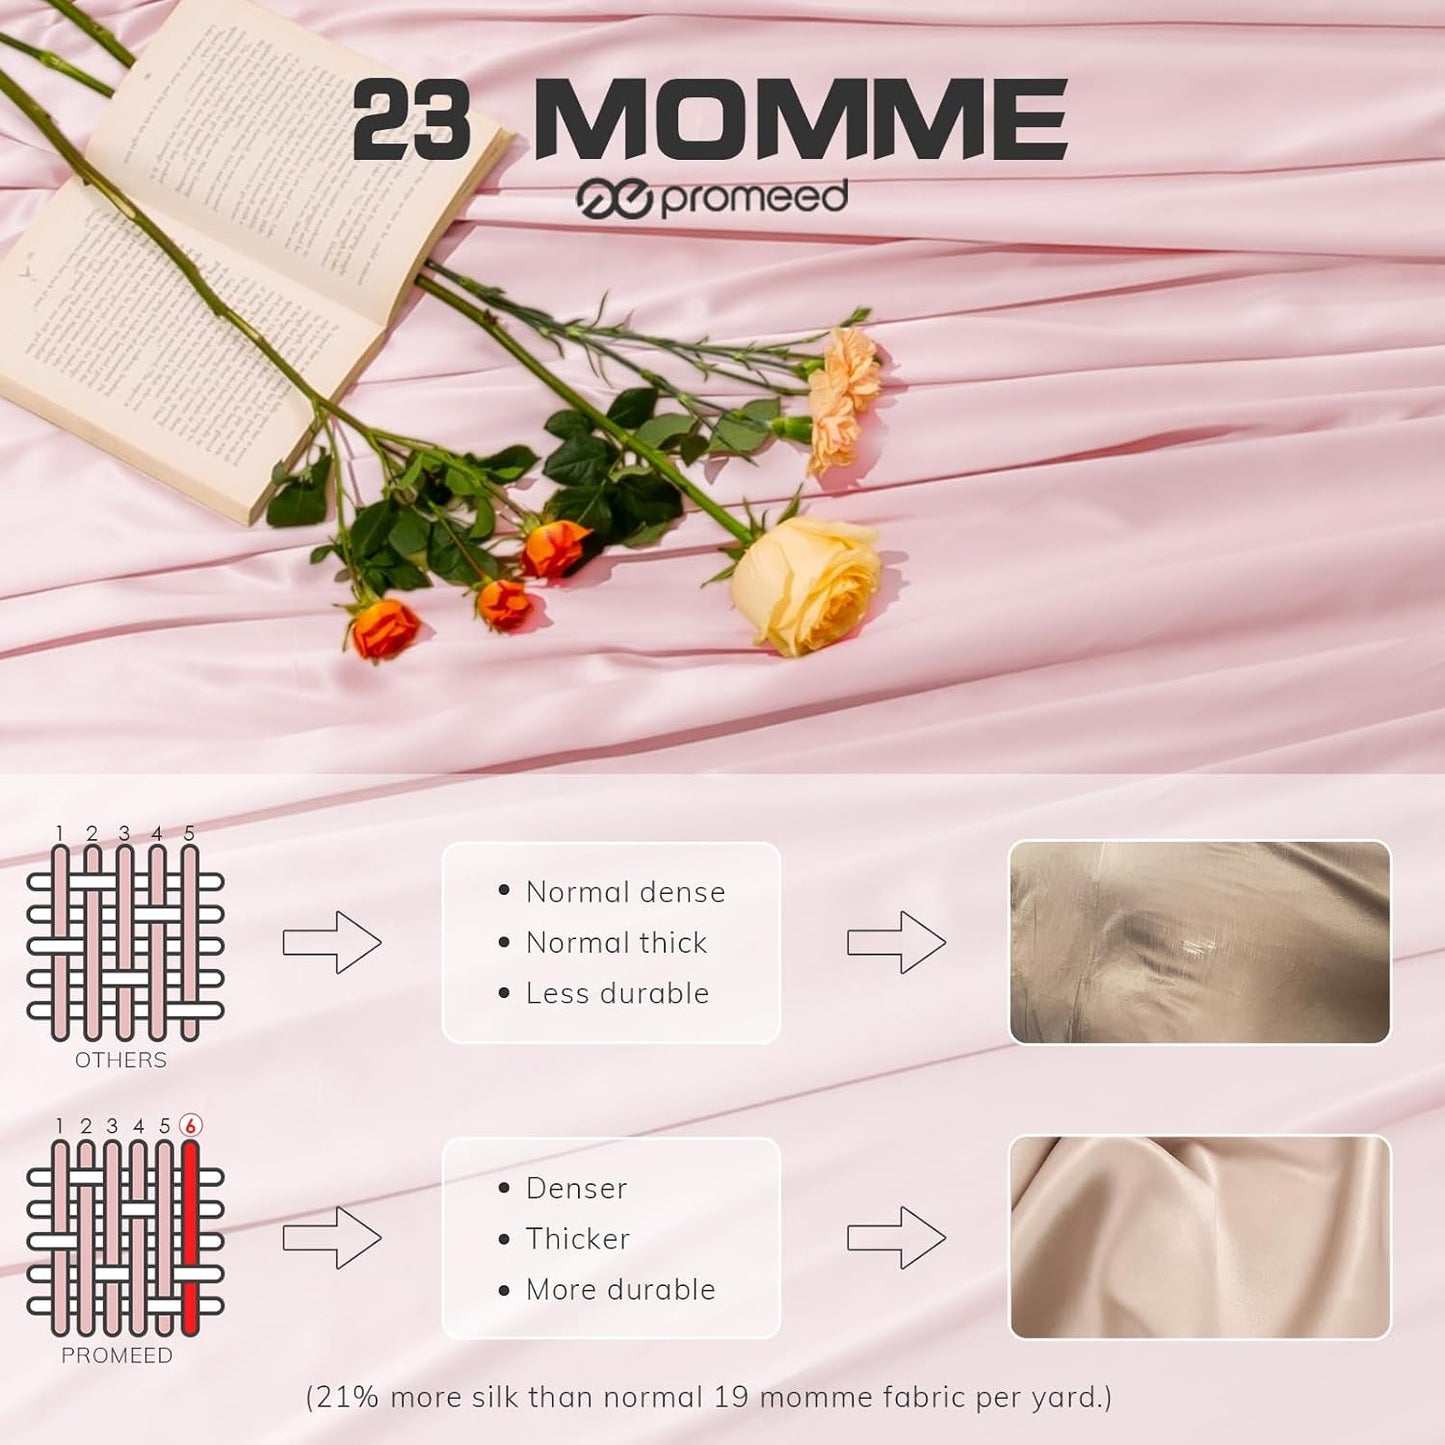 23 Momme Pink Silk Sheets King Size Set 4 Pieces, 100% Grade 6A+ Mulbery Silk Bed Sheets Sets with Fitted Sheet, Top Sheet and Pillowcases, Free Laundry Bag (Pink, King)